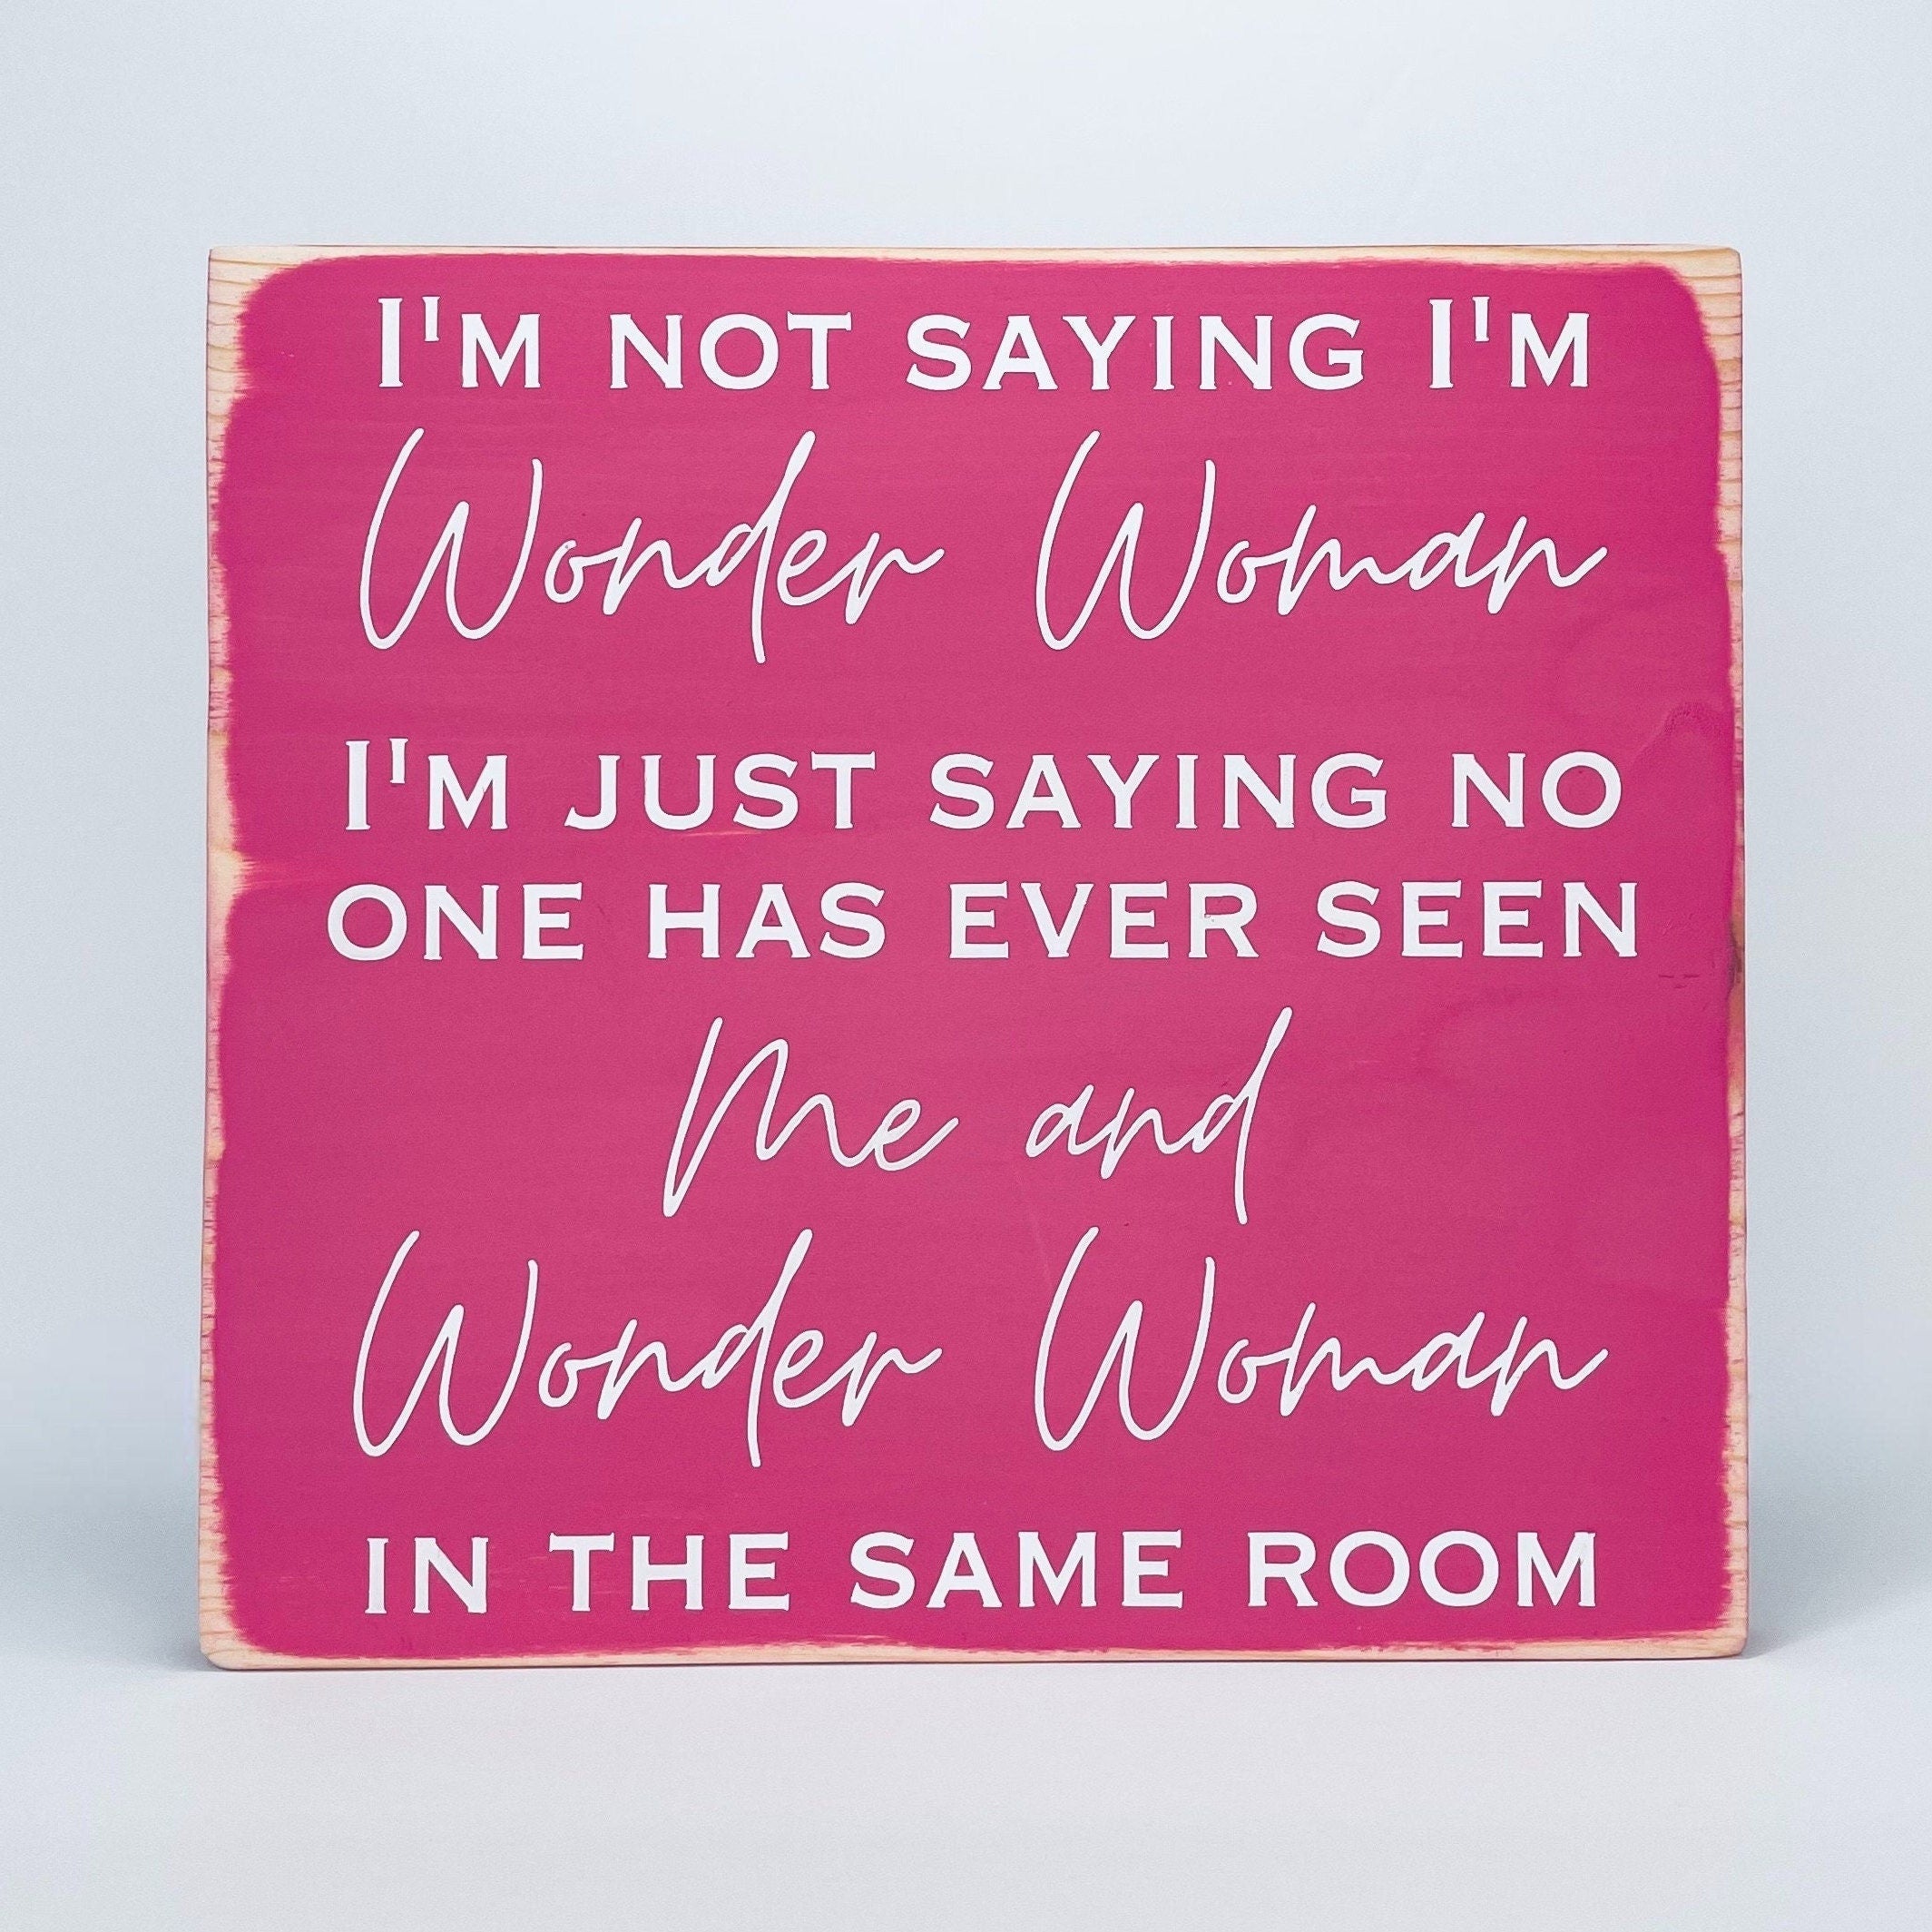 medium sized square wood sign painted pink with white lettering that reads, " I'm not saying I'm Wonder Woman, I'm just saying no one has ever seen me and Wonder Woman in the same room". All text is in all caps except for "Wonder Woman" and "Me and Wonder Woman". Text is centered, takes up the entire area and is on 7 lines. Matte finish.